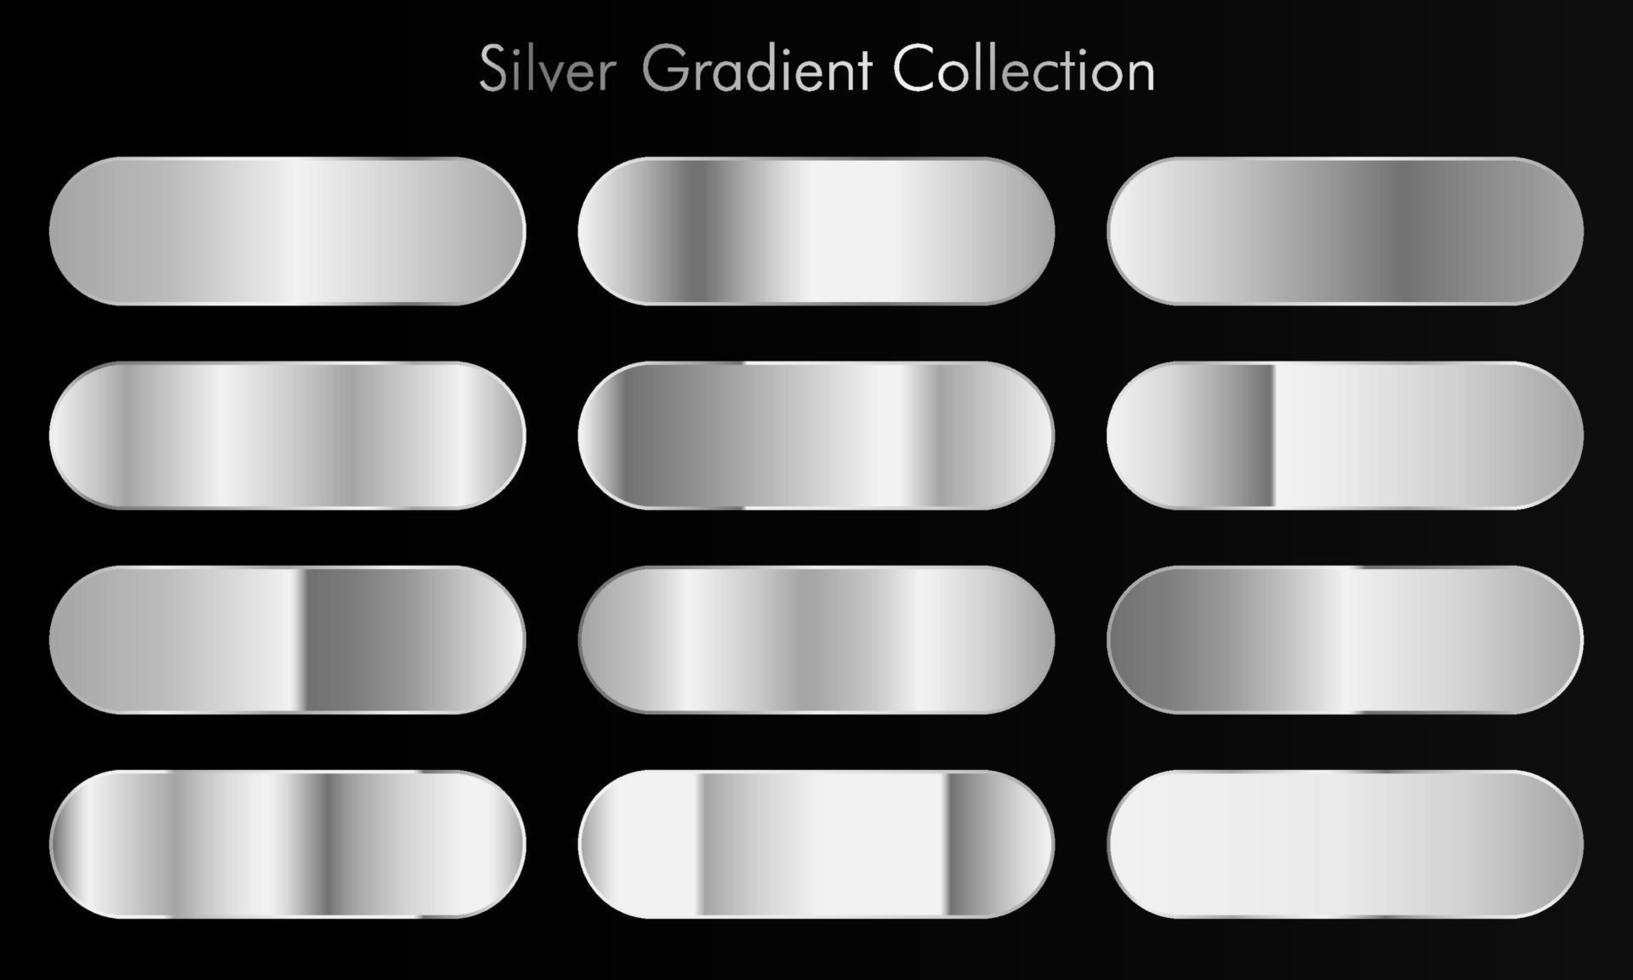 Huge big collection of silver gradients background swatches. Silver background texture. Vector illustration